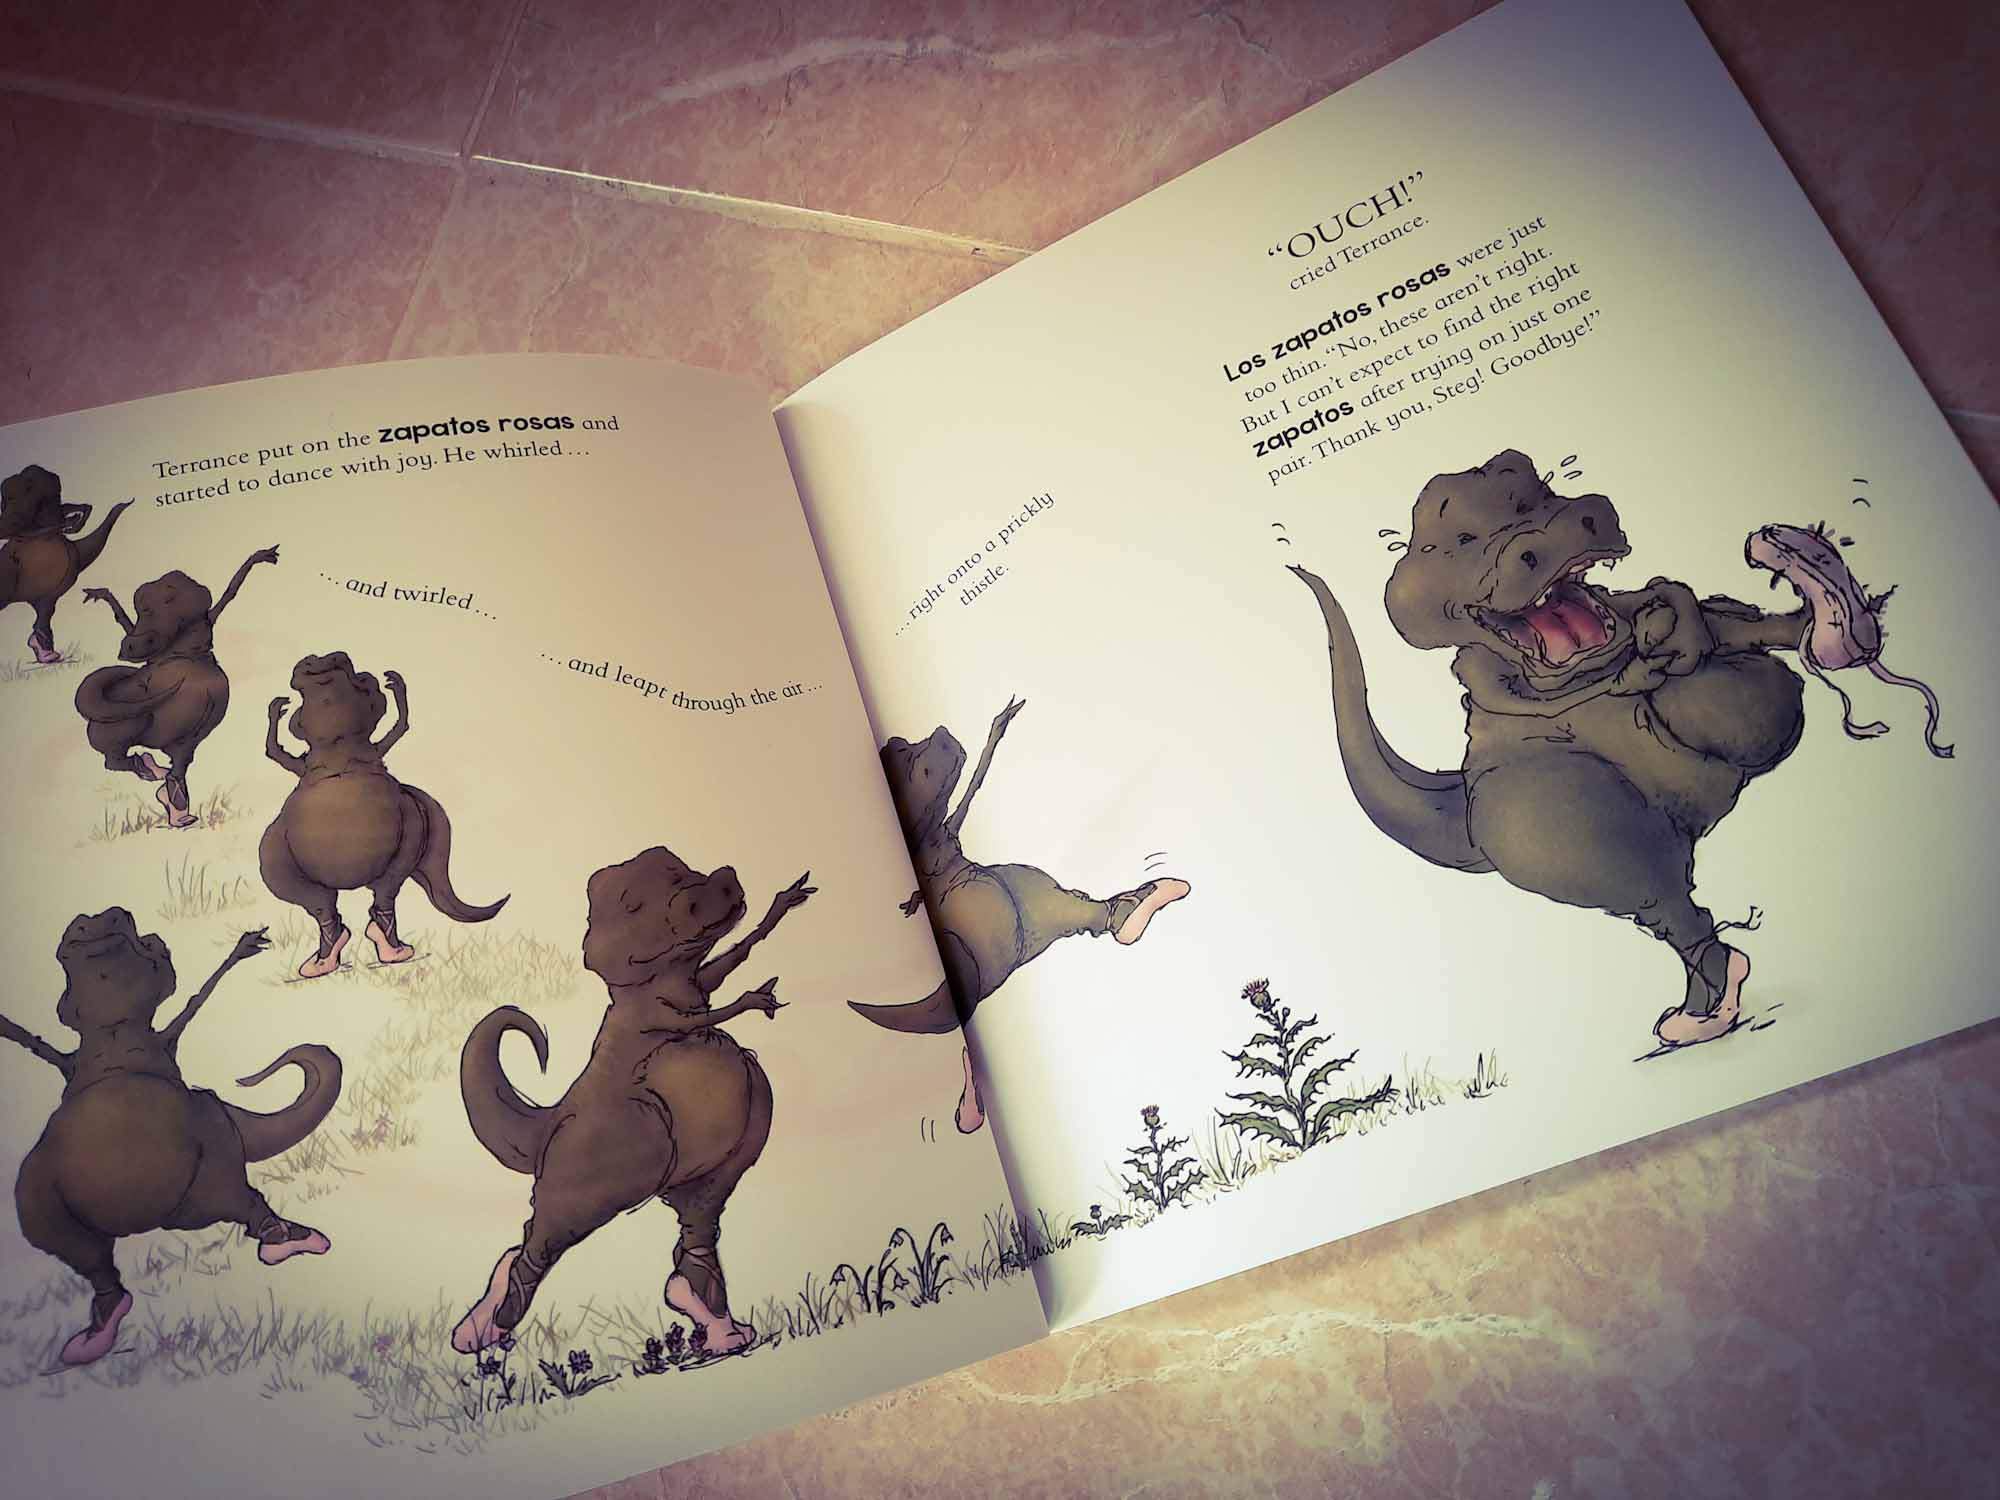 Inside page view of a children's language learning book, showing a dancing dinosaur